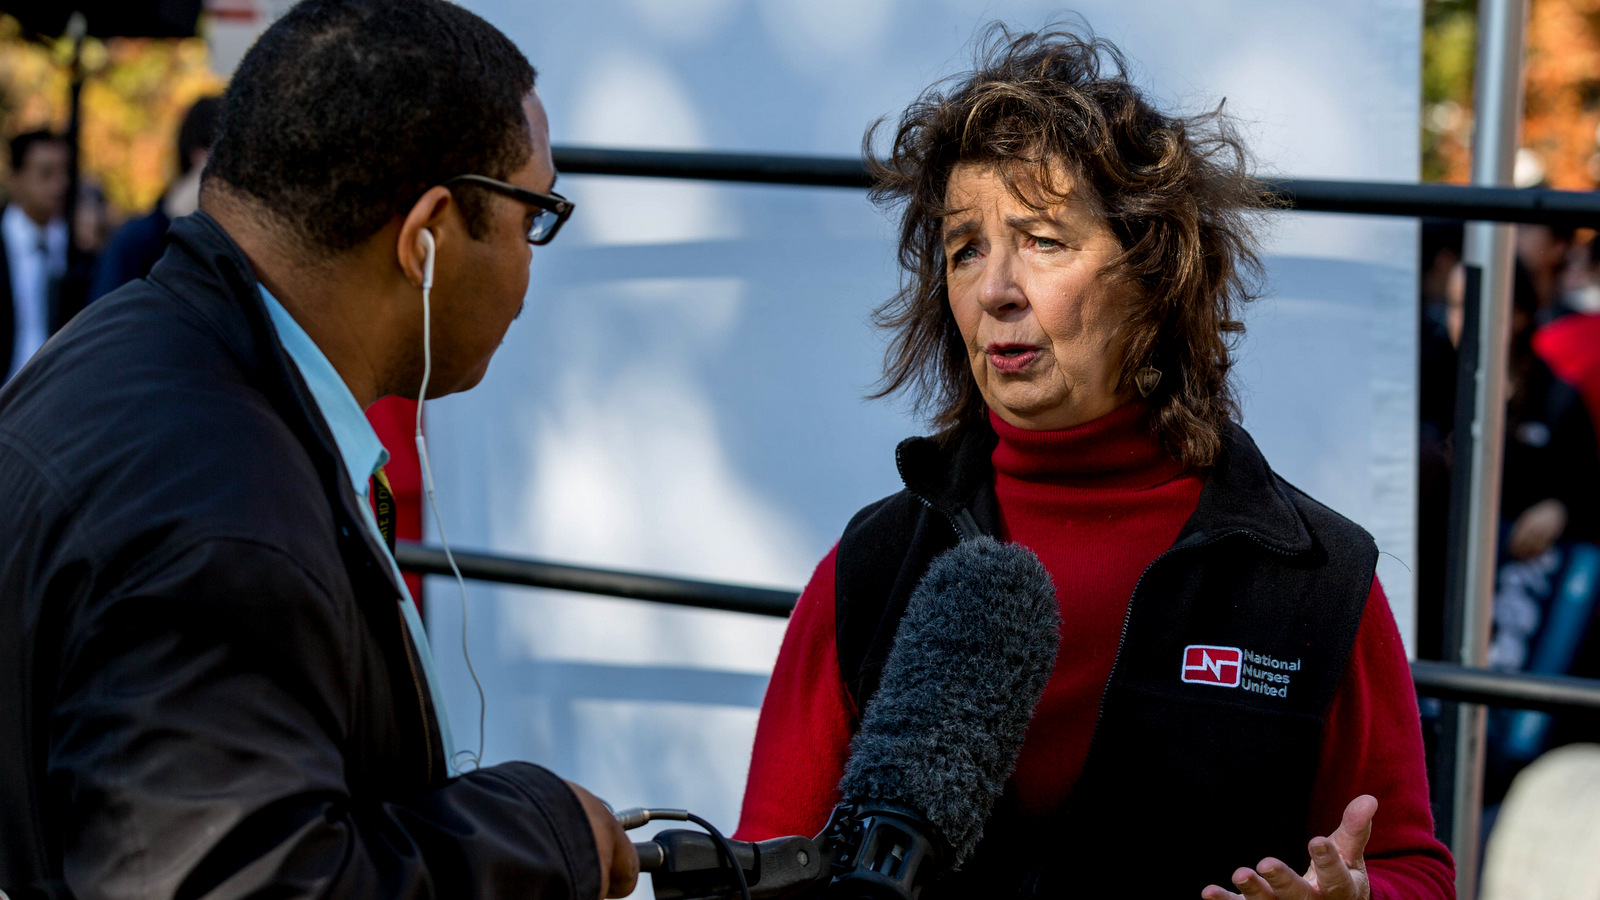 RoseAnn DeMoroRally speaks to the media a rally for social and economic justice & equality, Upper Senate Park, U.S. Capitol, Washington DC, November 17, 2016. (Photo: Lorie Shaull/CC)